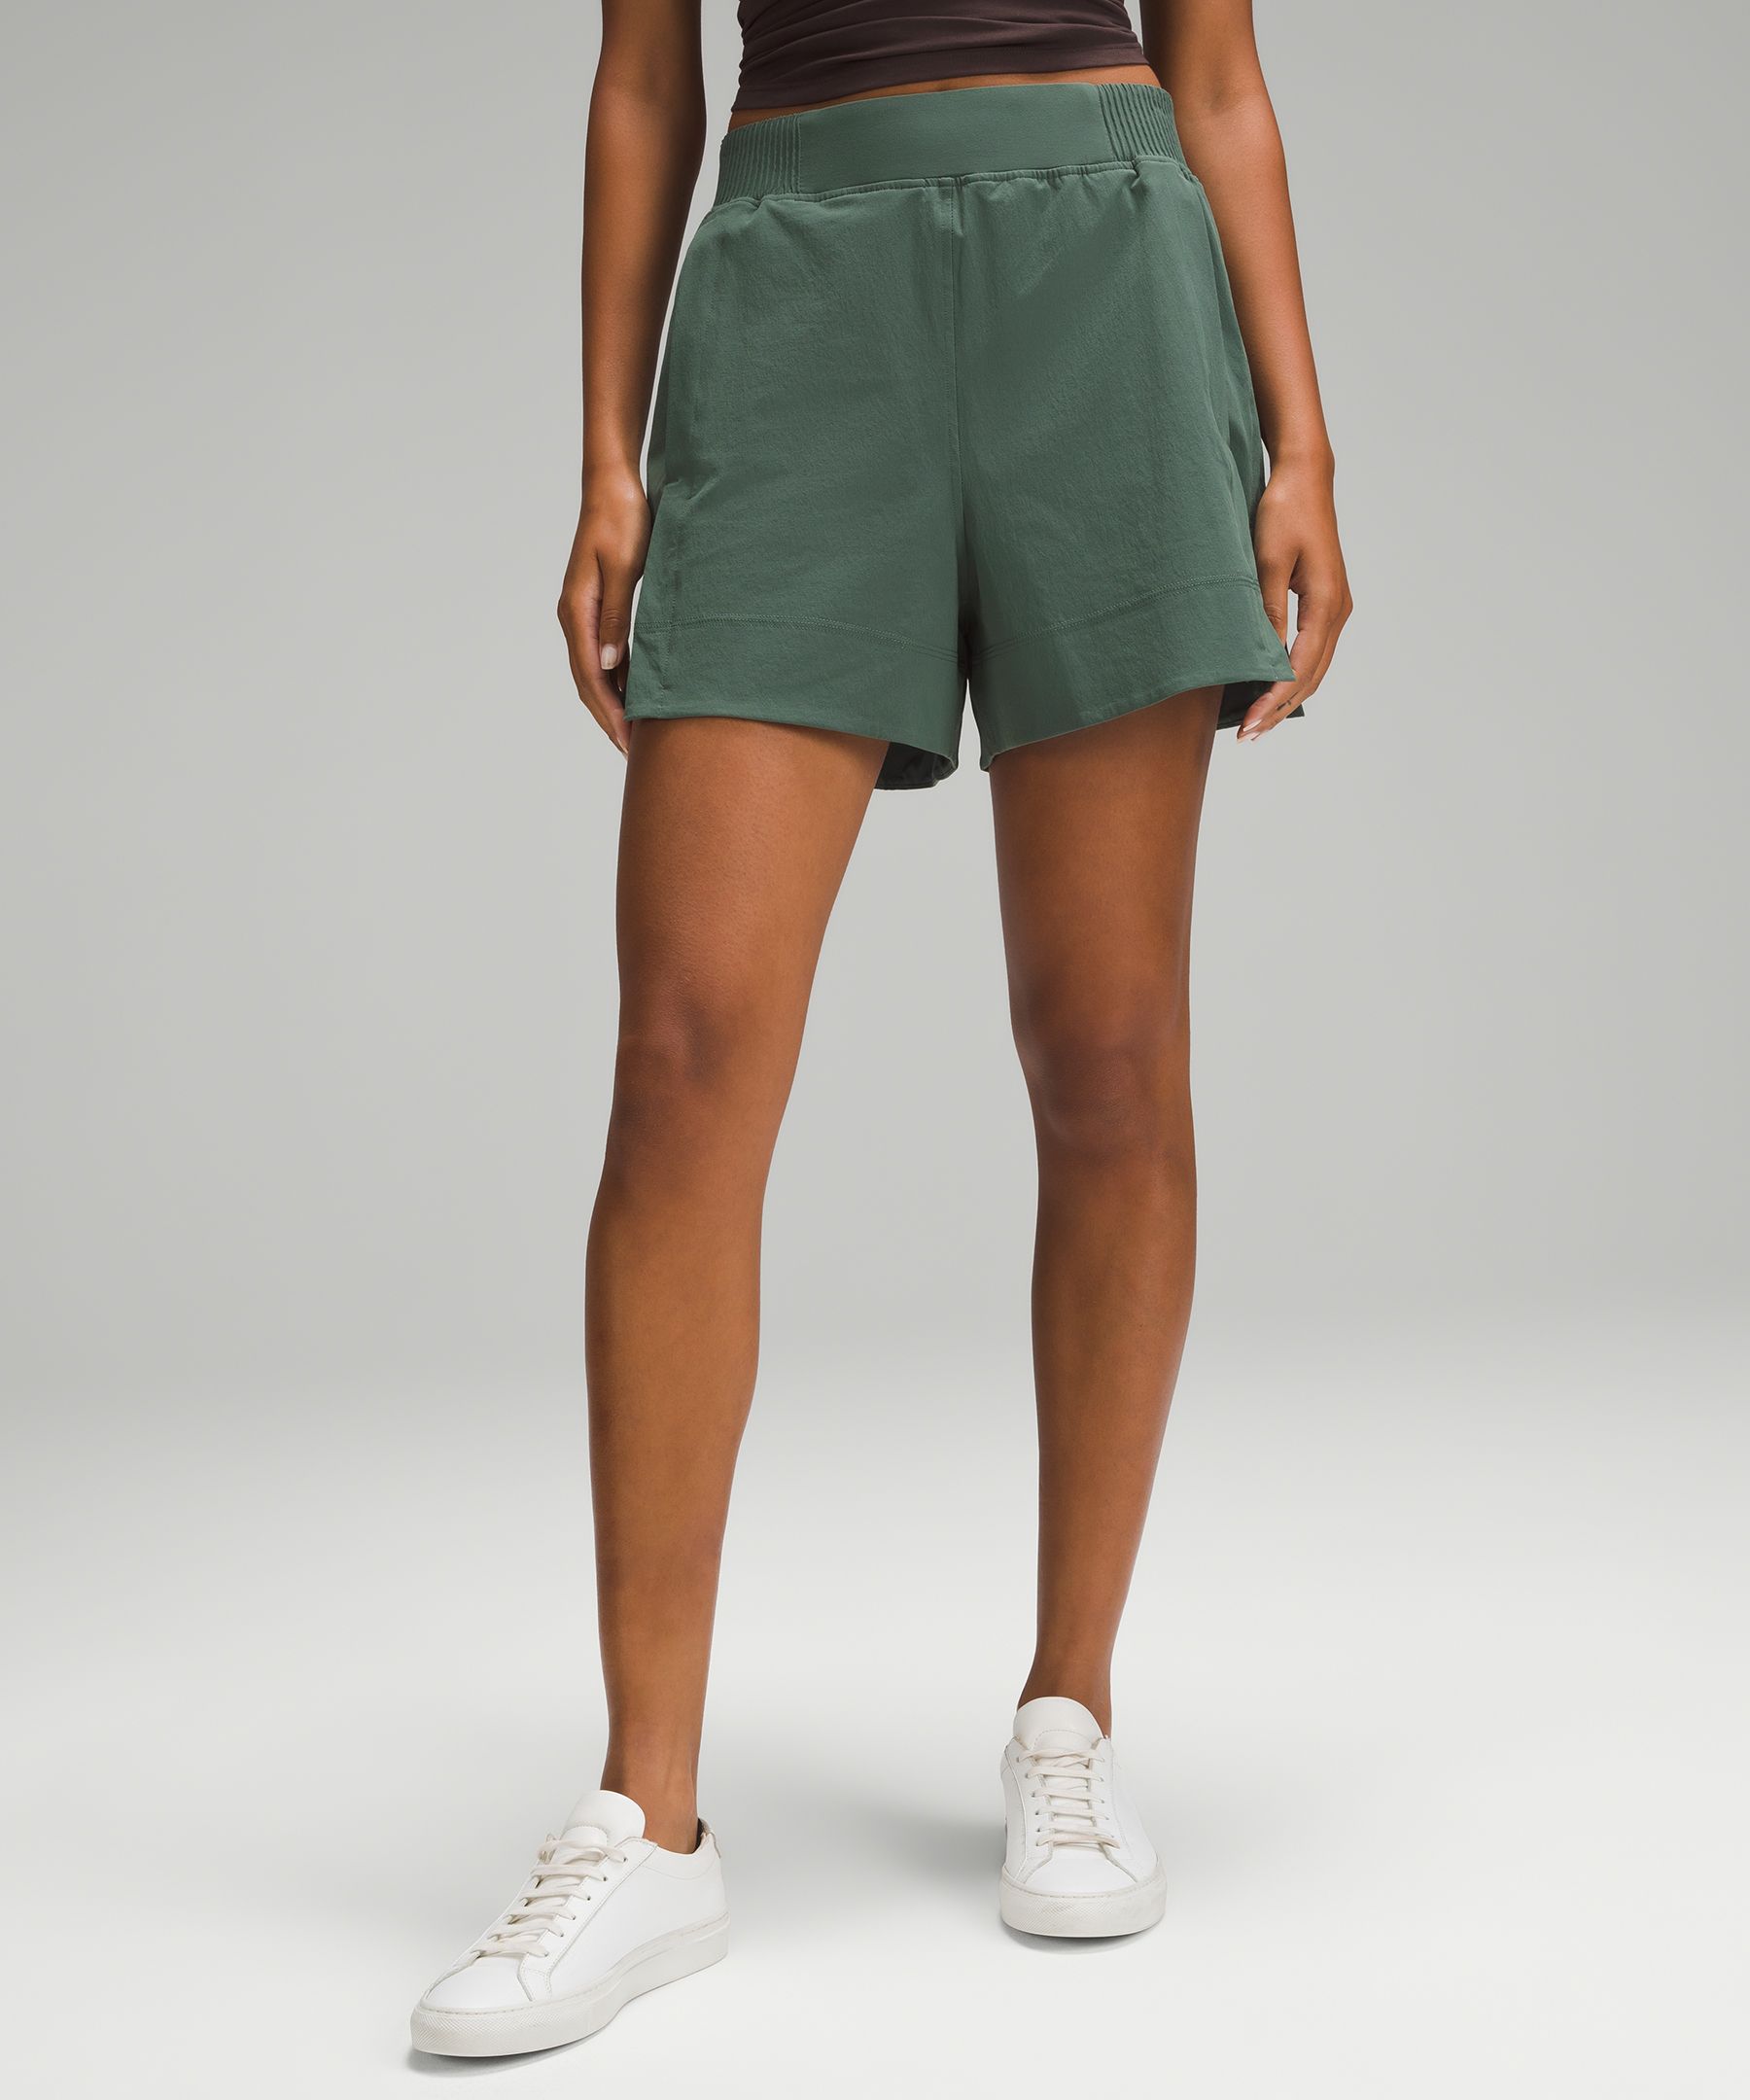 Lululemon Stretch Woven Relaxed-fit High-rise Shorts 4"